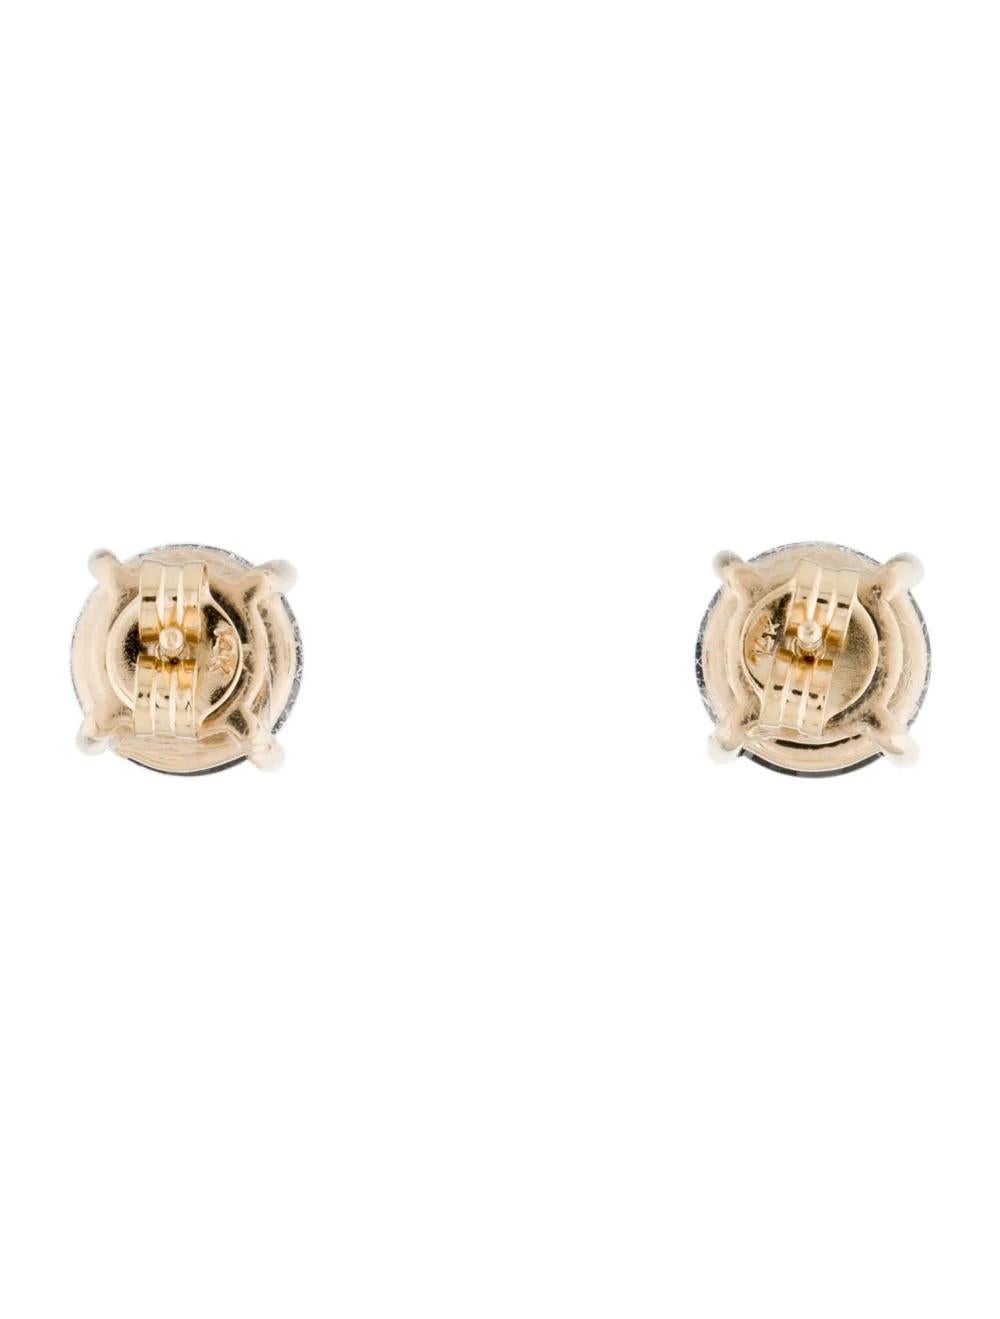 14K 6.59ctw Diamond Stud Earrings - Timeless Elegance, Statement Jewelry In New Condition For Sale In Holtsville, NY